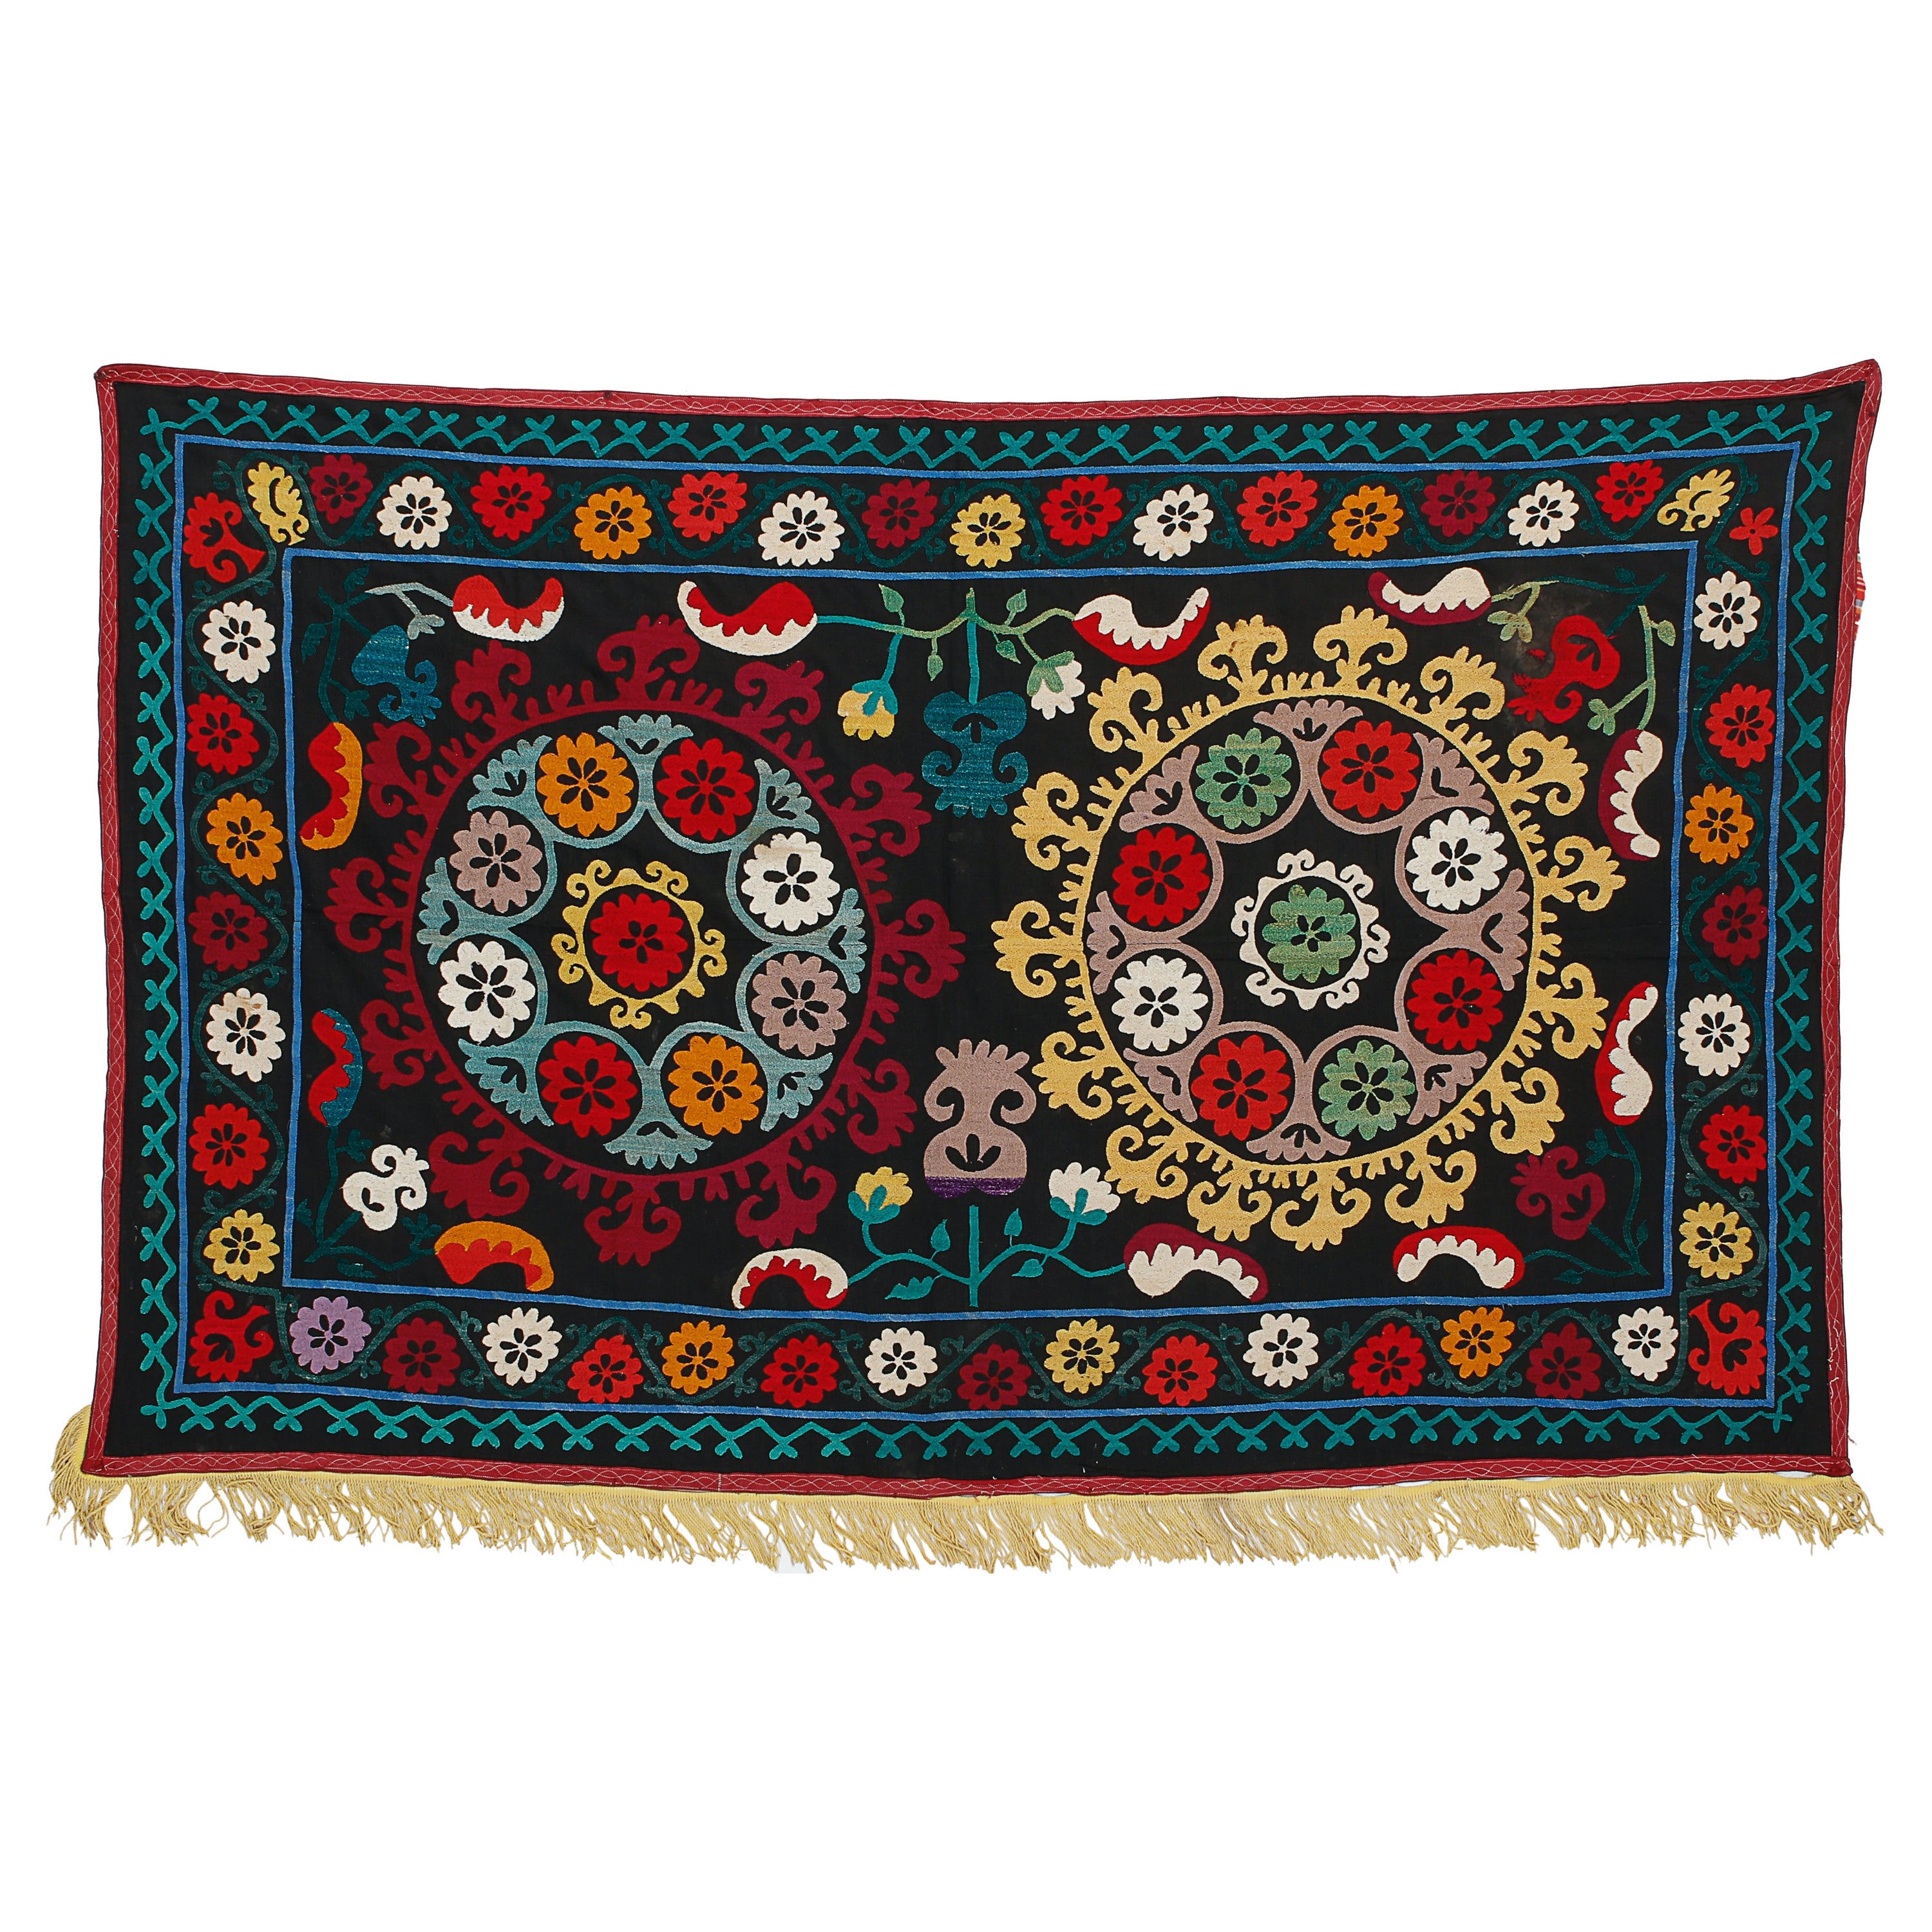 3'9"x6' Uzbek Suzani Wall Hanging, Colorful Tablecloth, Silk Embroidery Tapestry For Sale